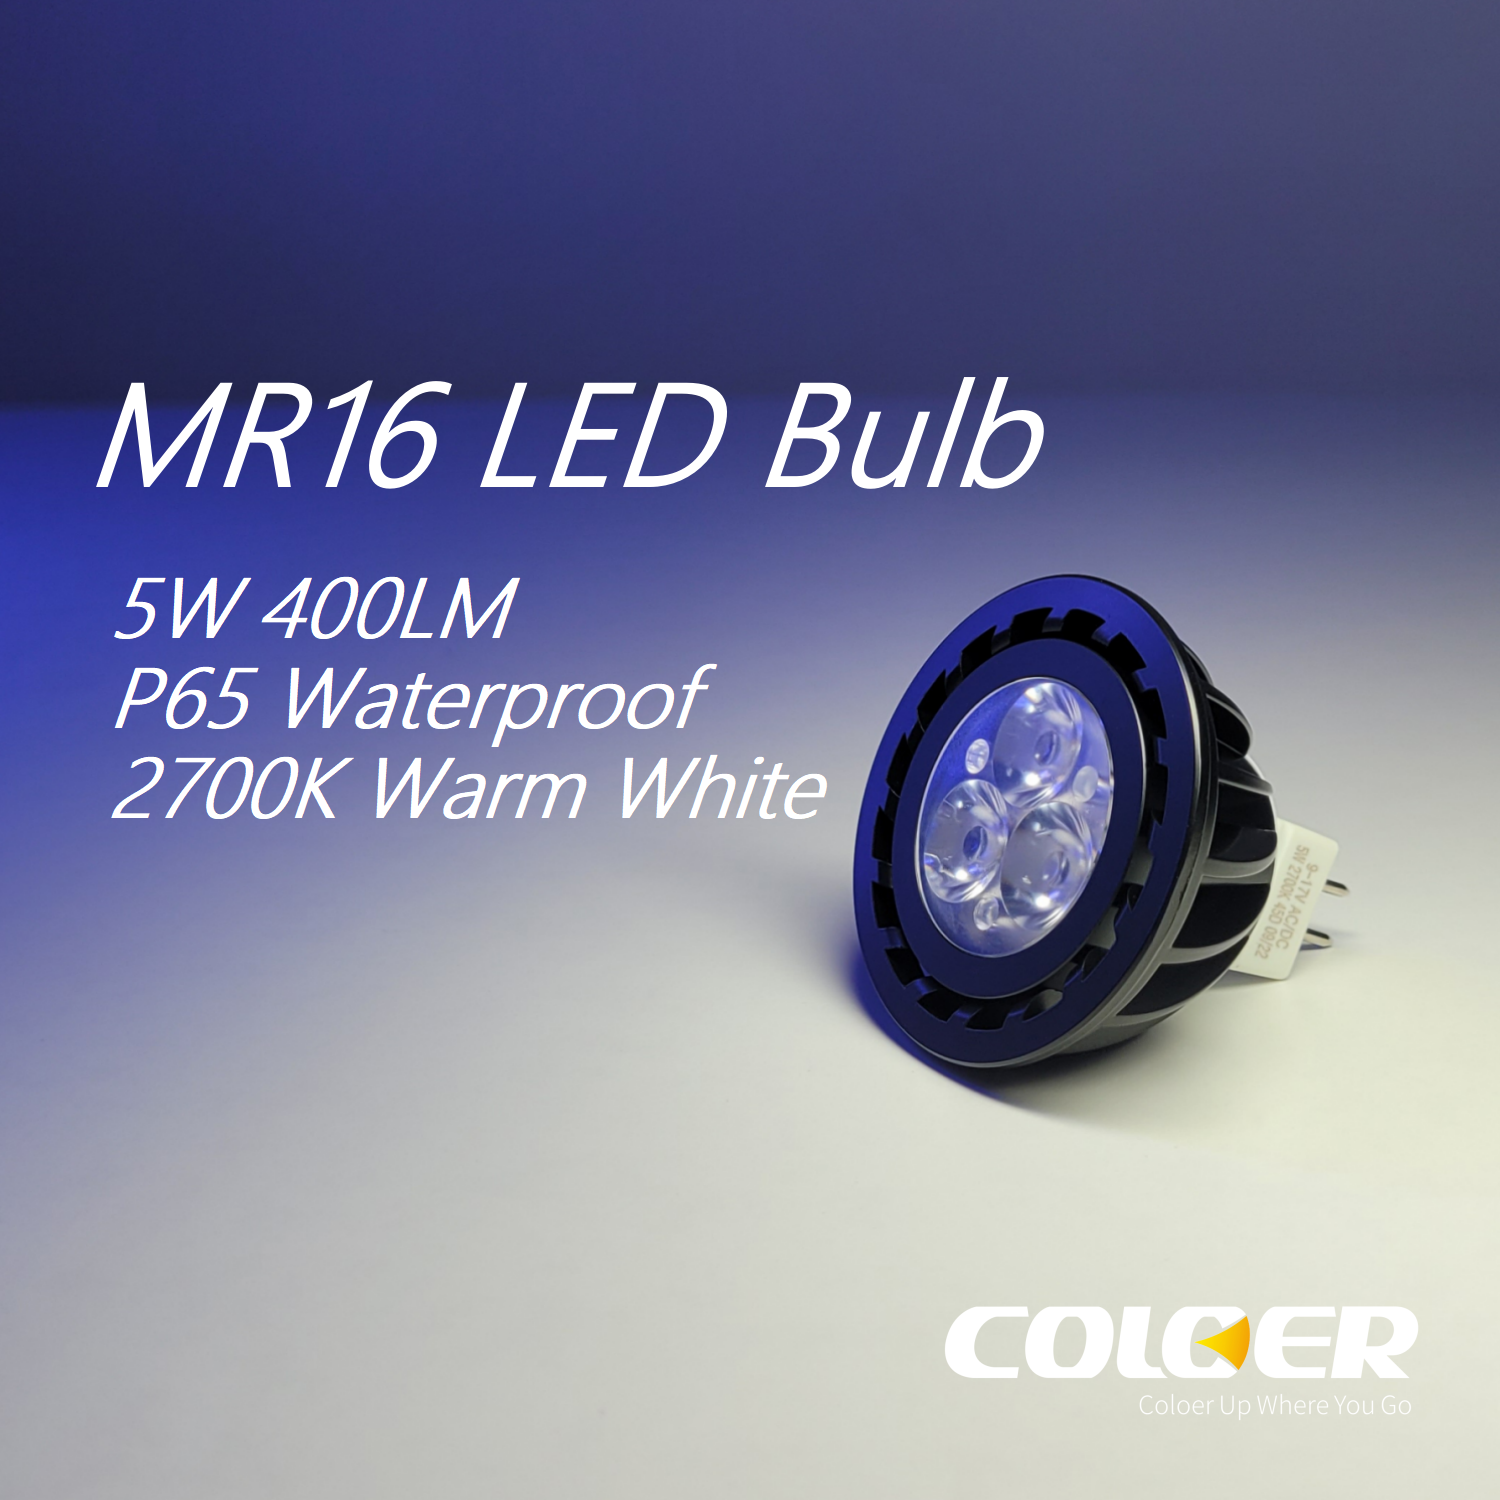 5W MR16 LED bulb with 400LM output, P65 waterproof rating, and 2700K warm white light, energy-efficient lighting kit.